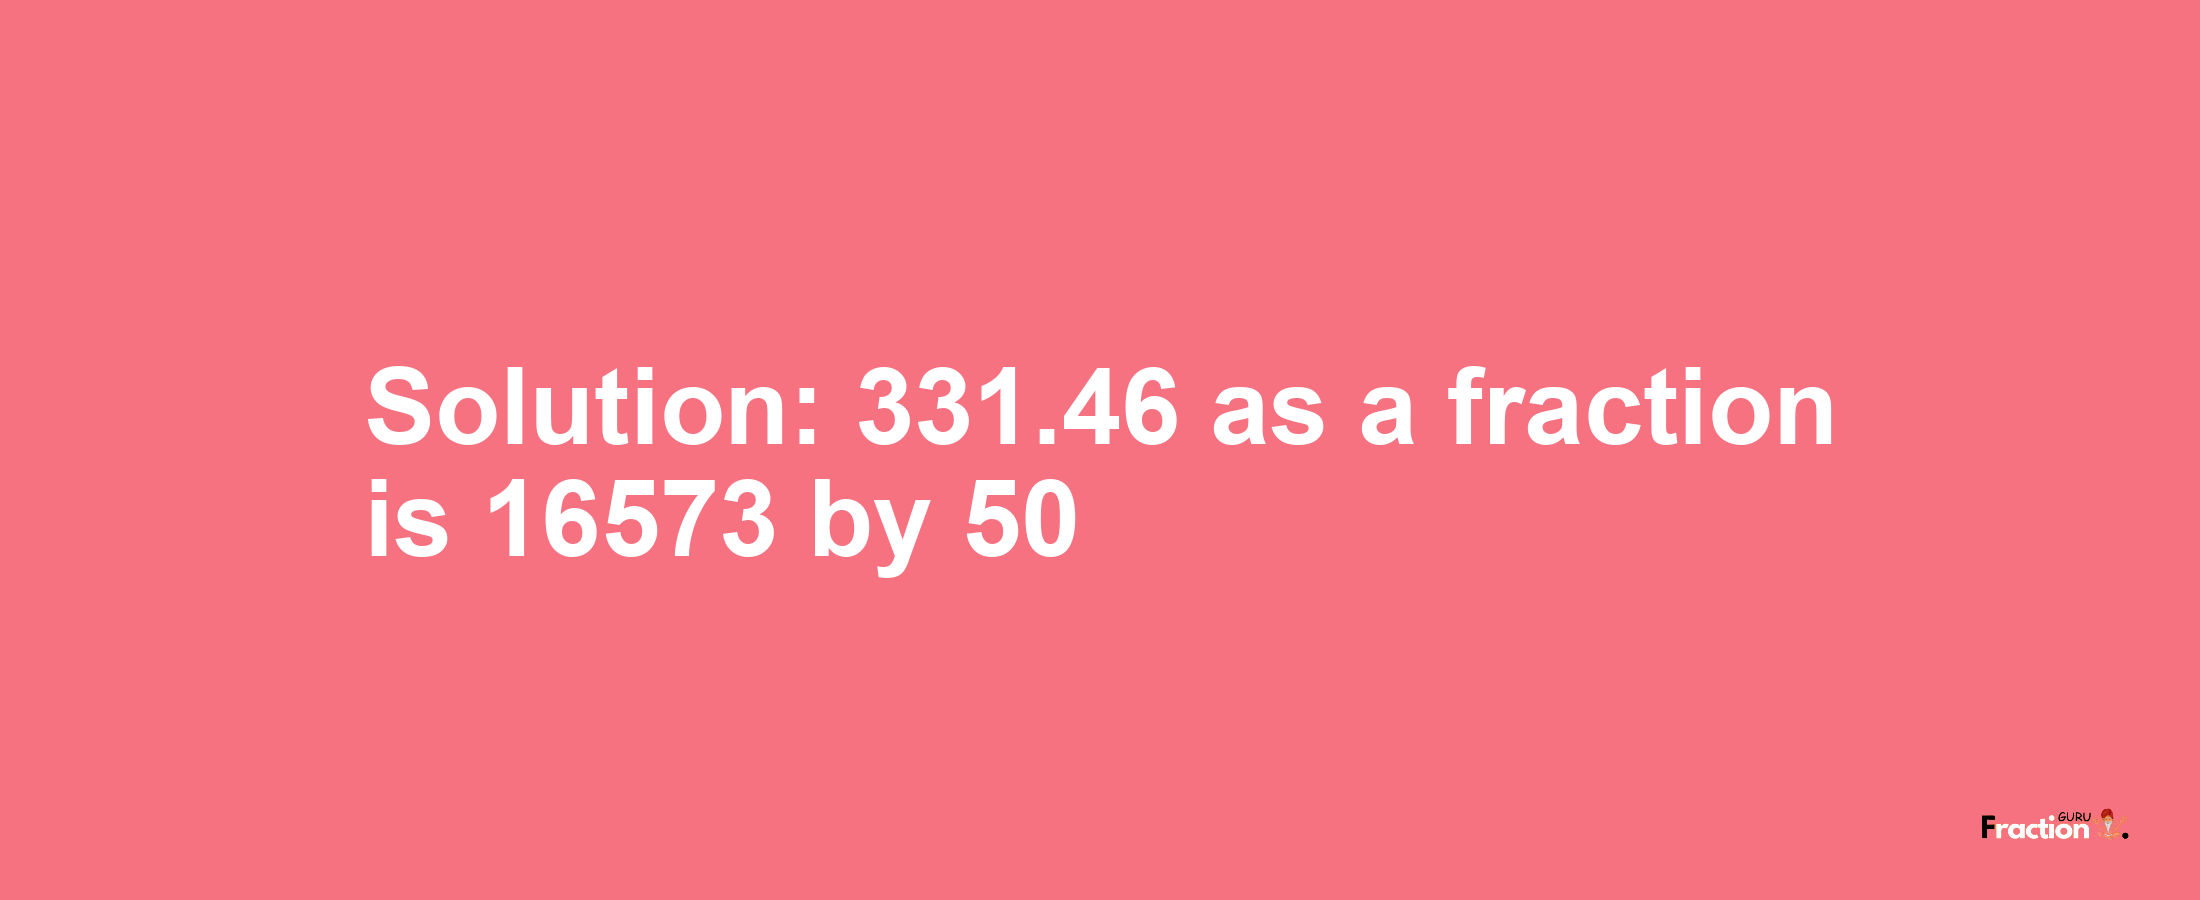 Solution:331.46 as a fraction is 16573/50